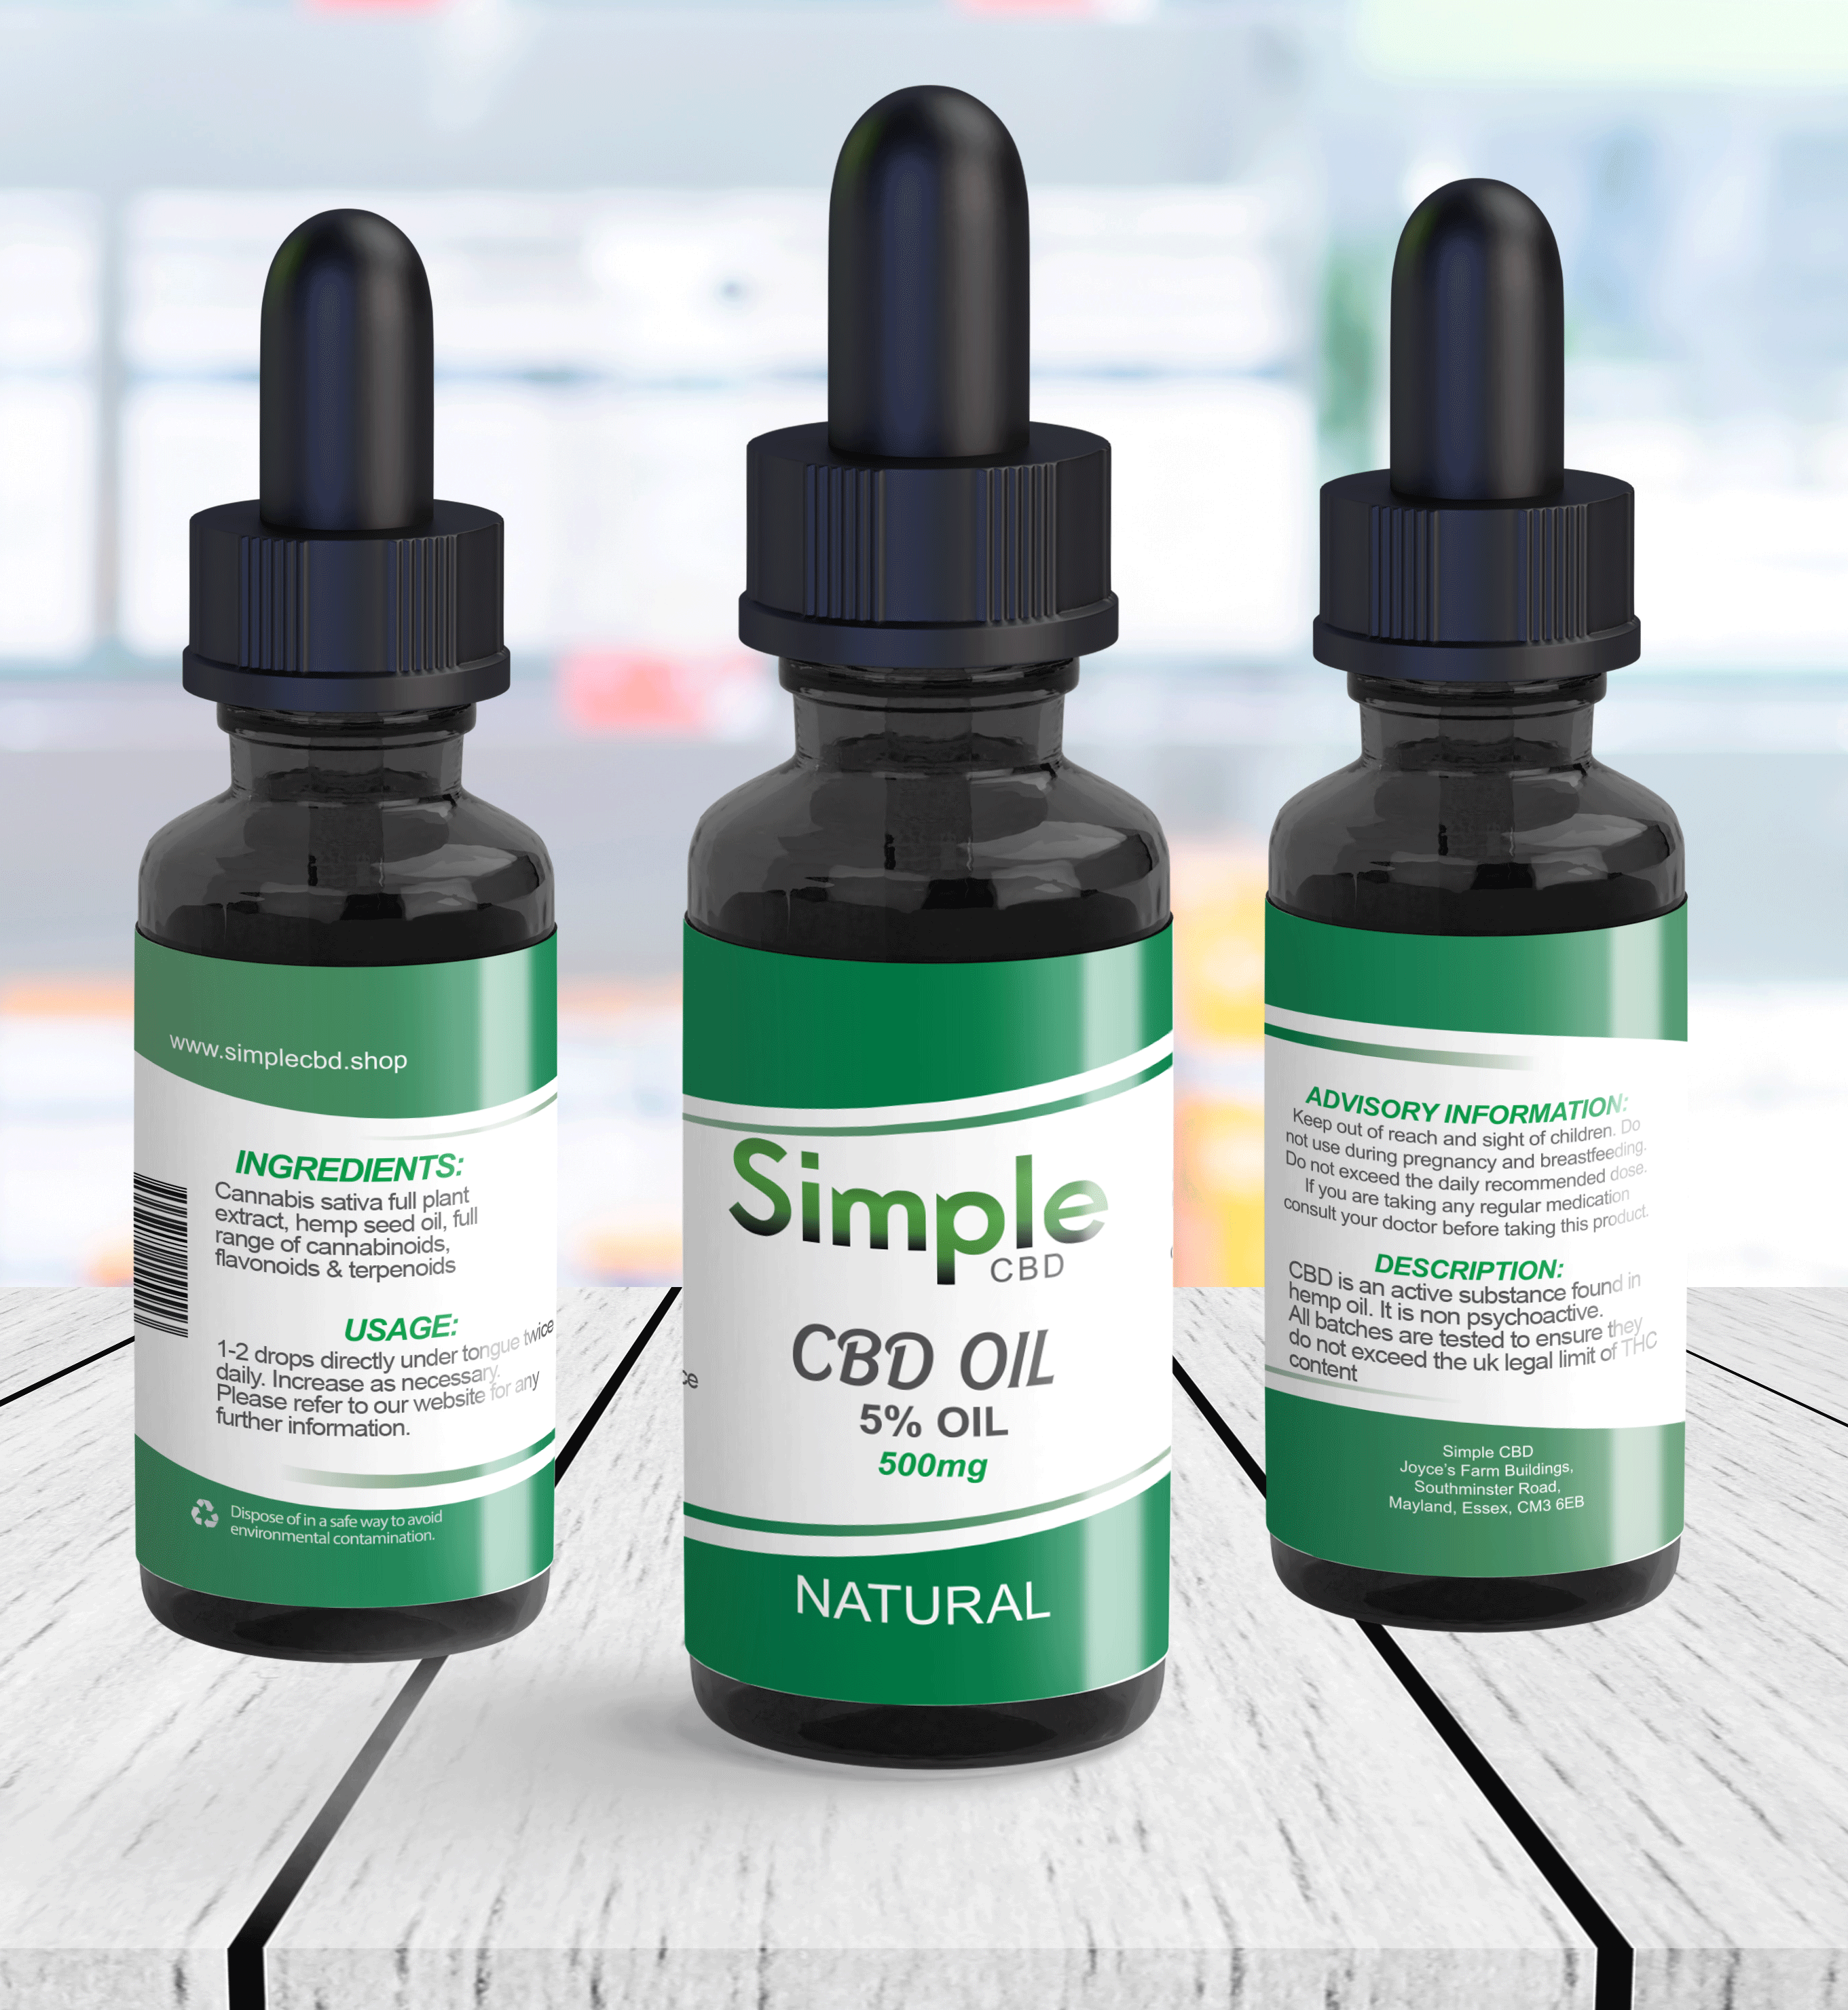 Monthly Subscription 500mg (5%) Golden CBD oil  in a 10ml bottle